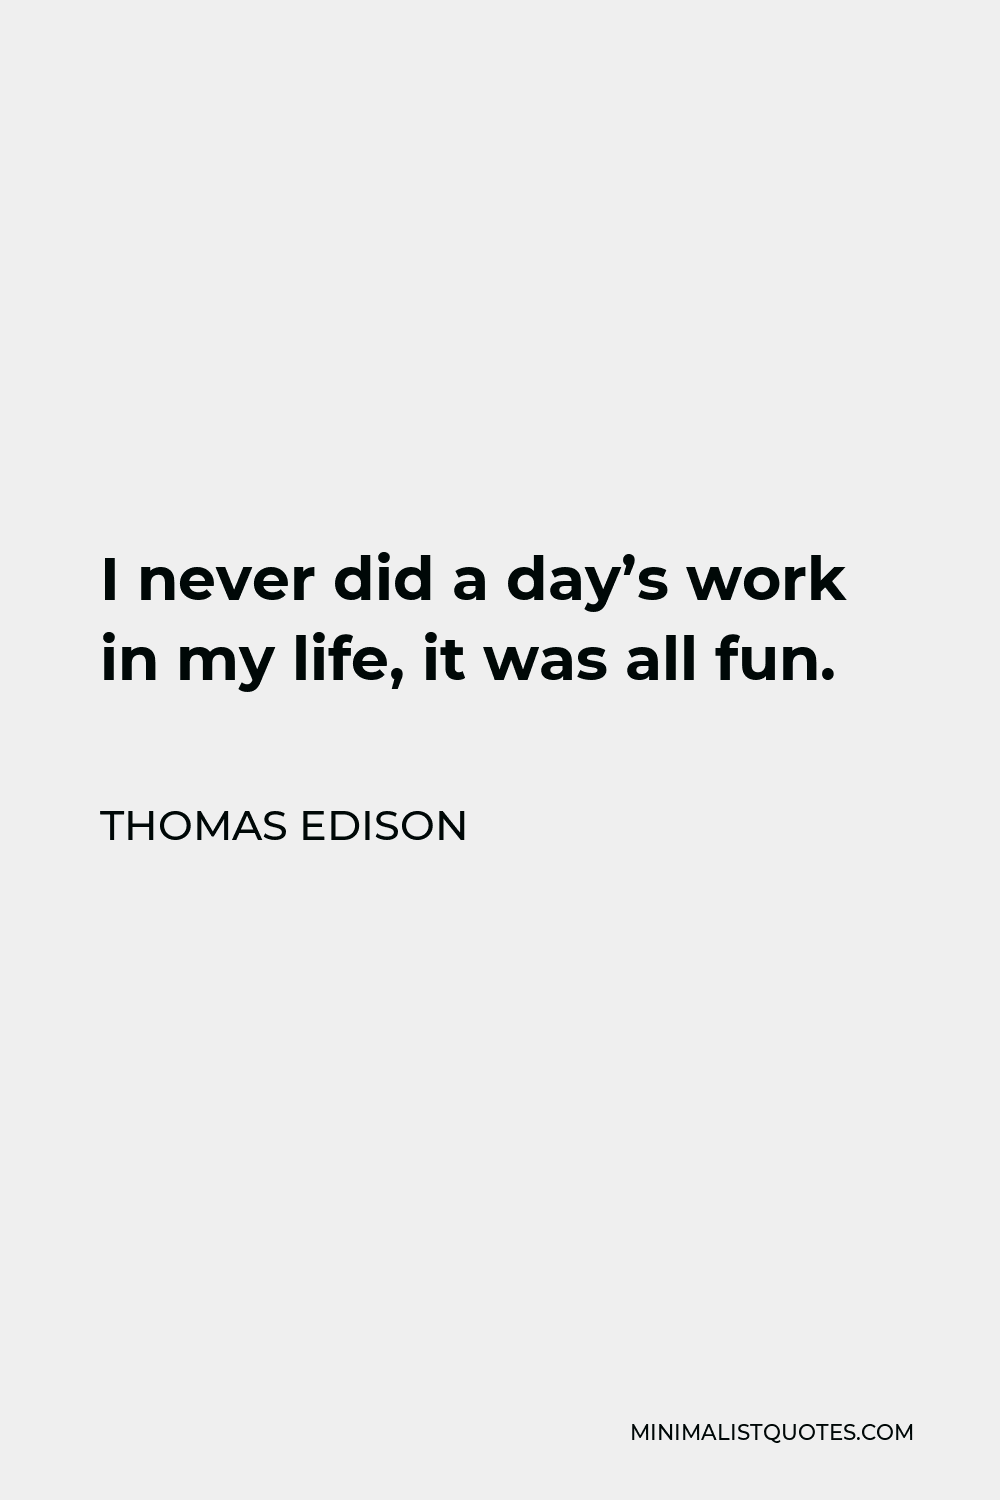 Thomas Edison Quote - I never did a day’s work in my life, it was all fun.